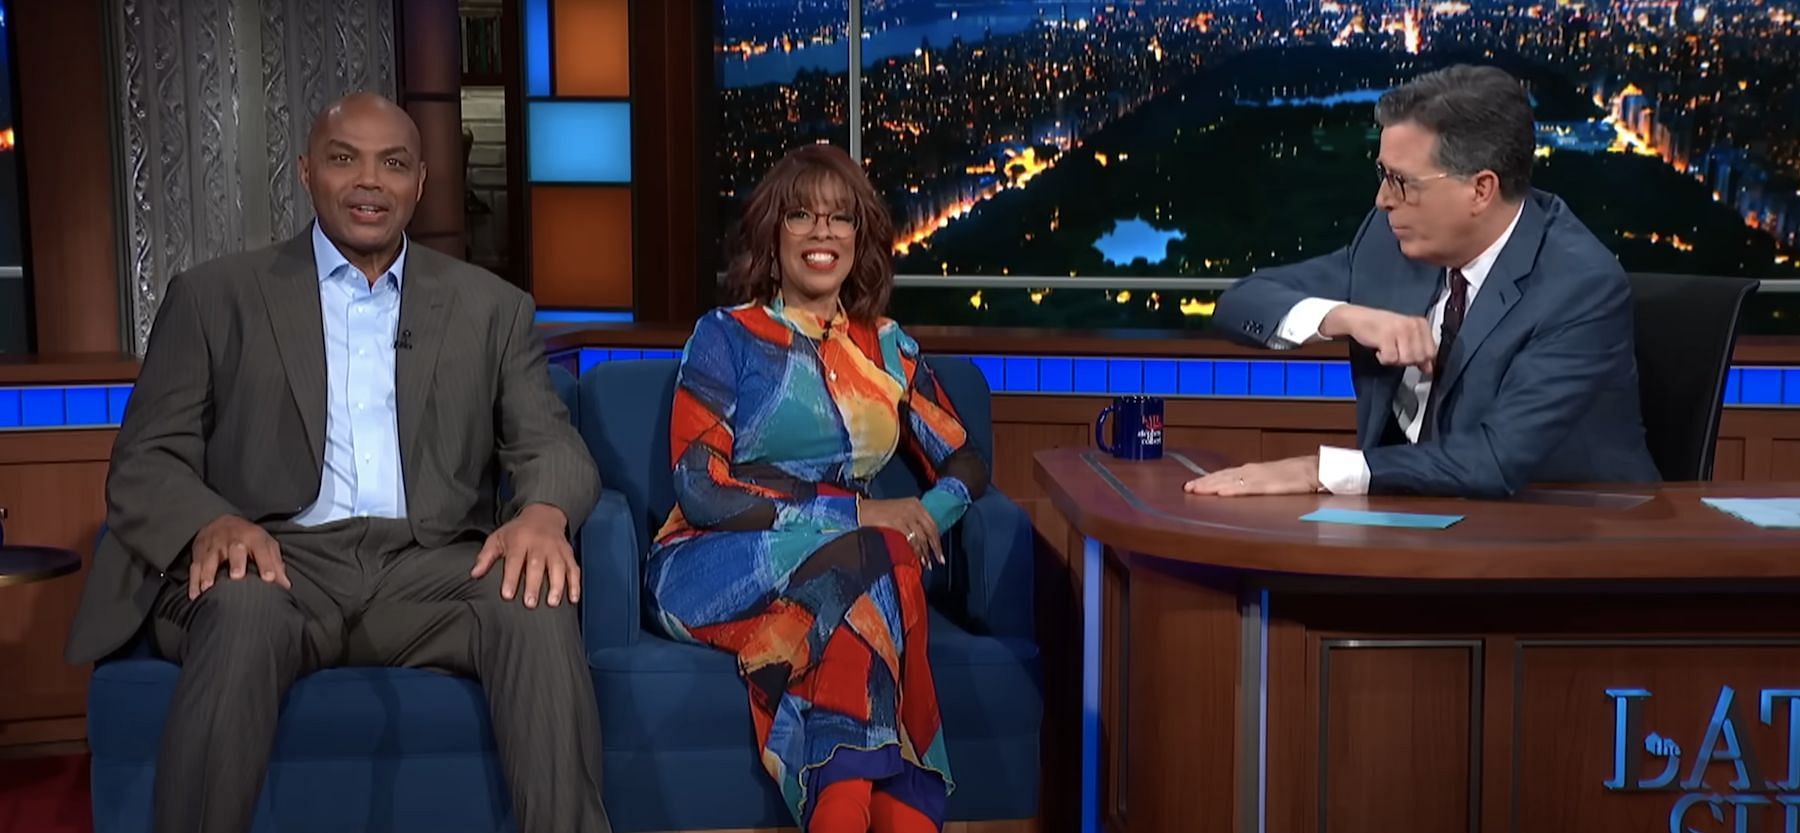 Stephen Colbert playfully taunts Charles Barkley for ignoring his calls during COVID days.